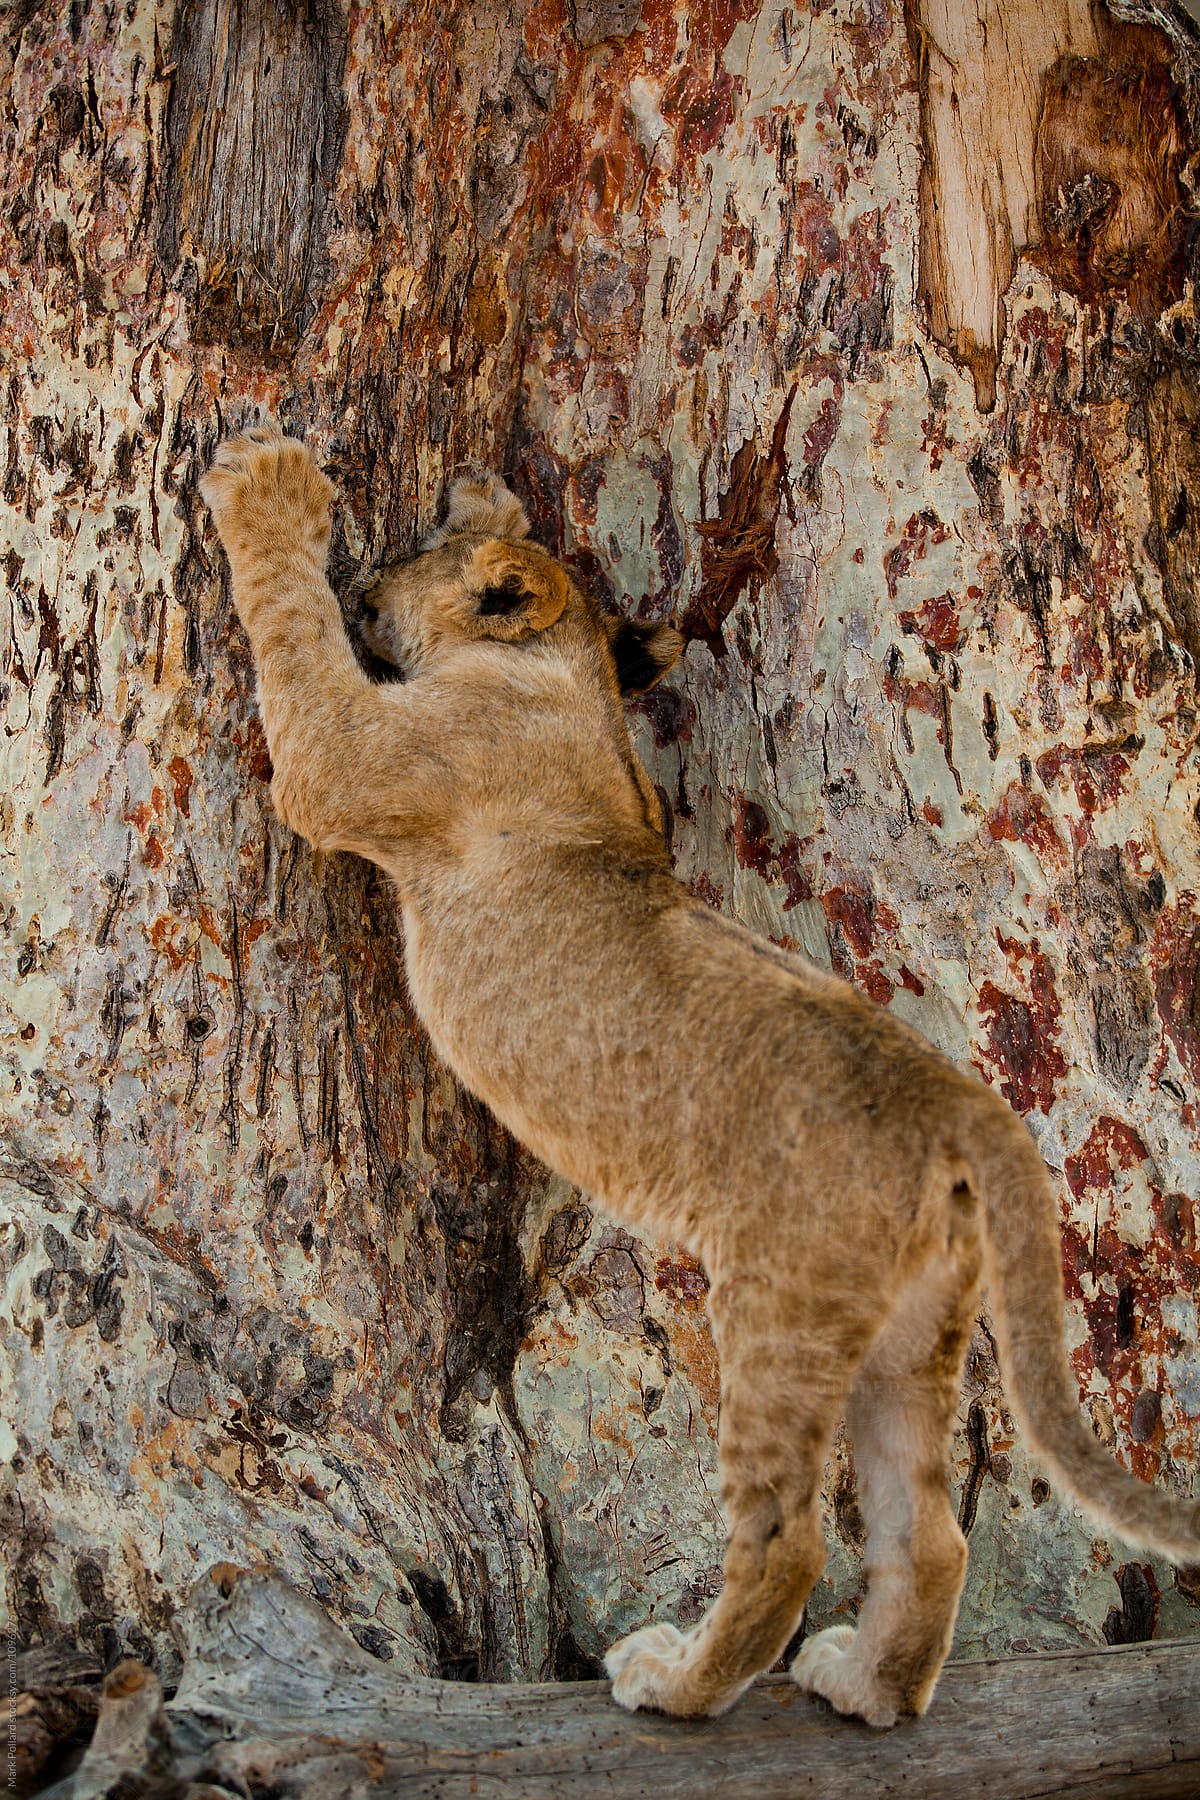 Young Lion Sharpening Claws on a Tree